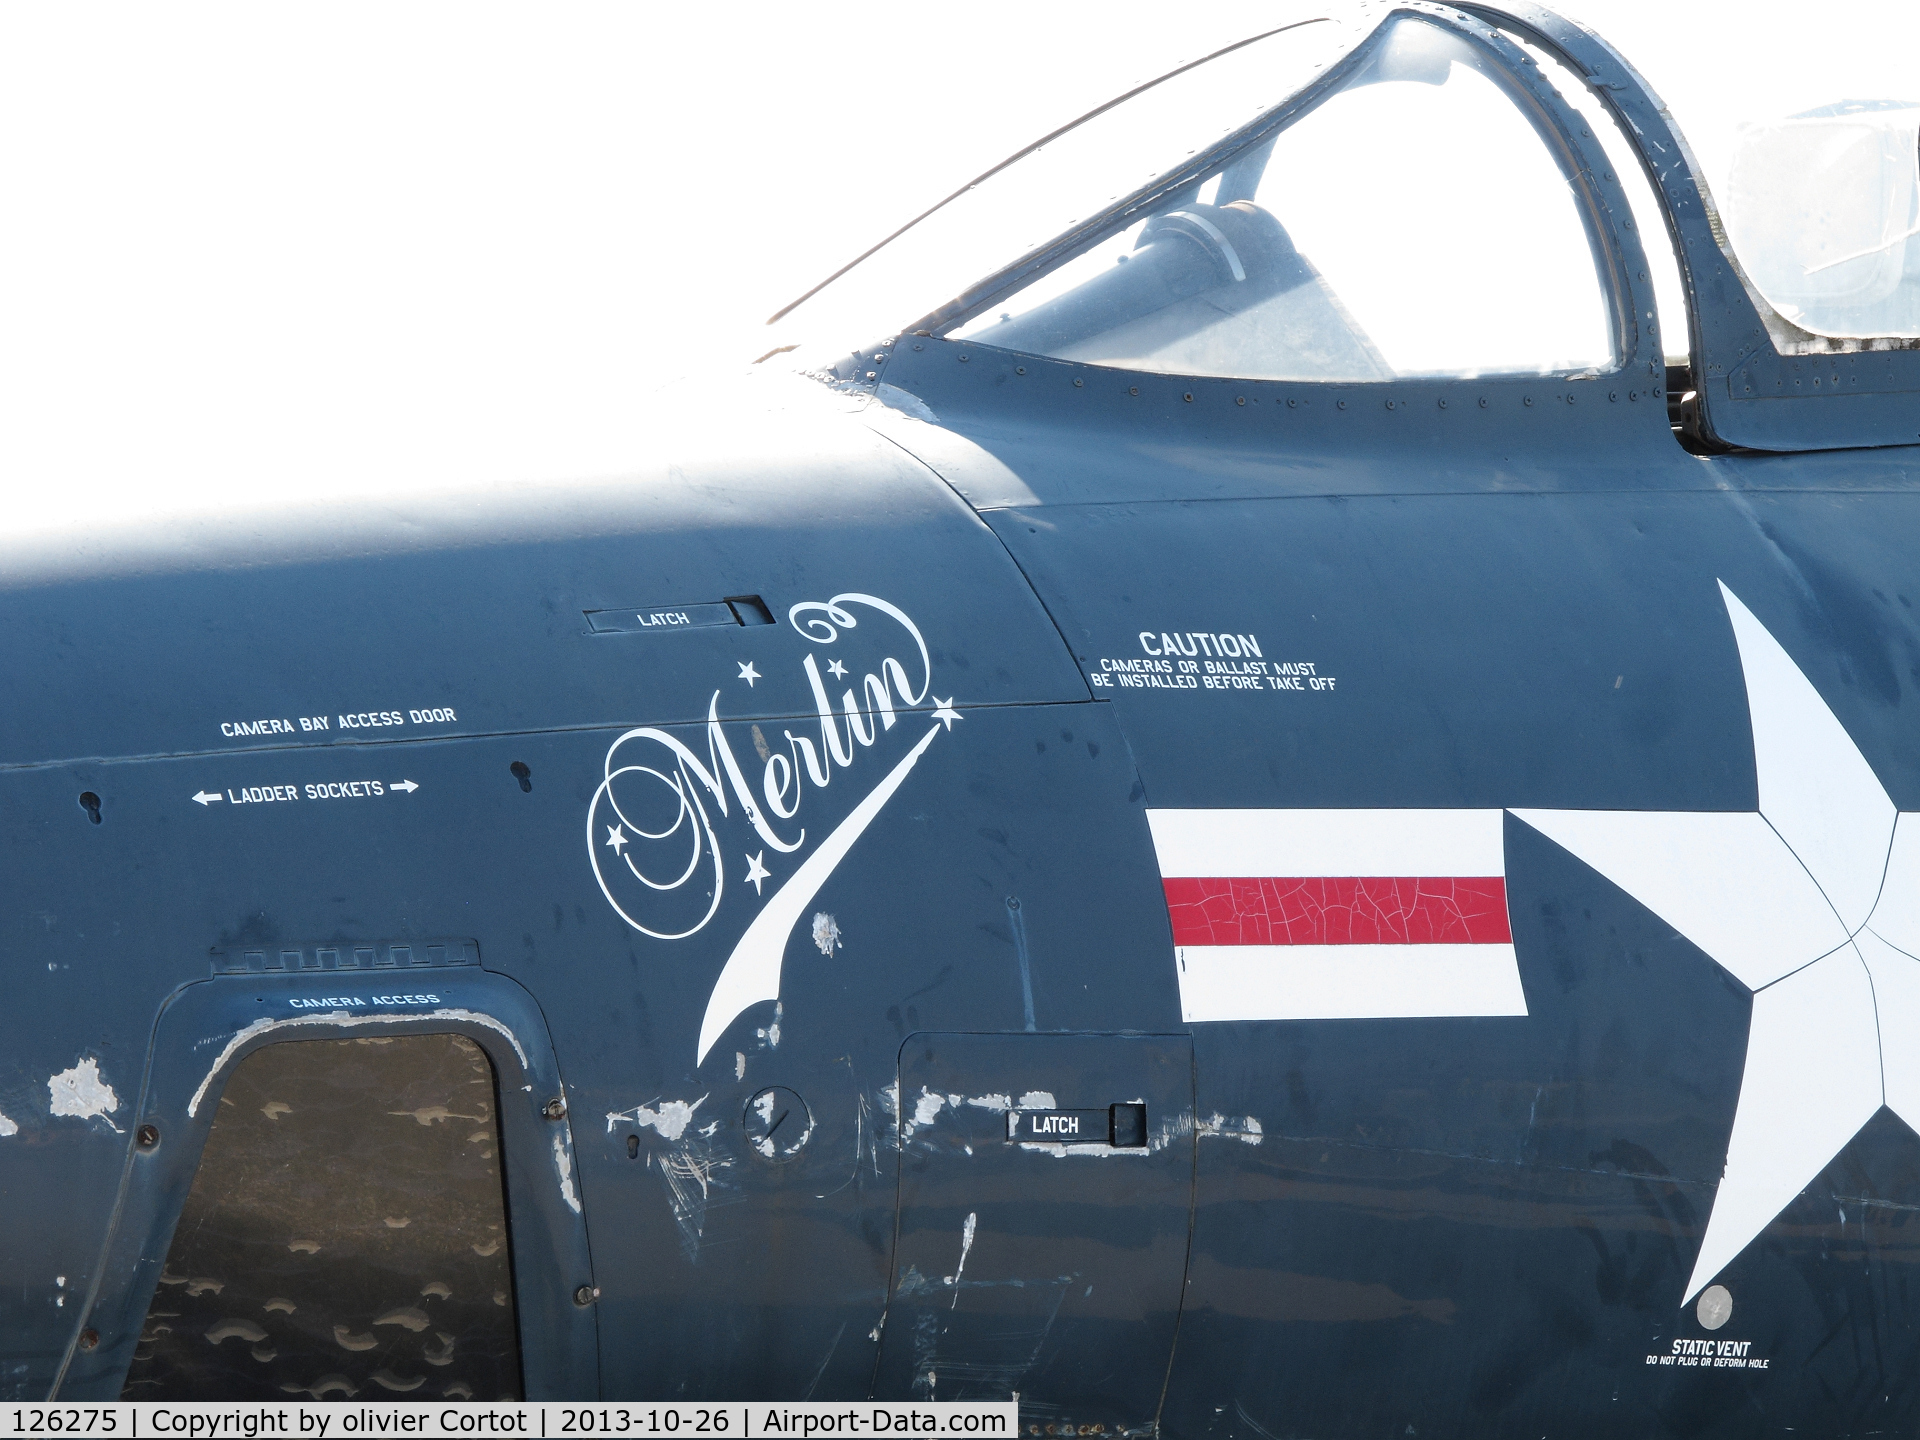 126275, 1950 Grumman F9F-5P Panther C/N Not found 126275, close-up view